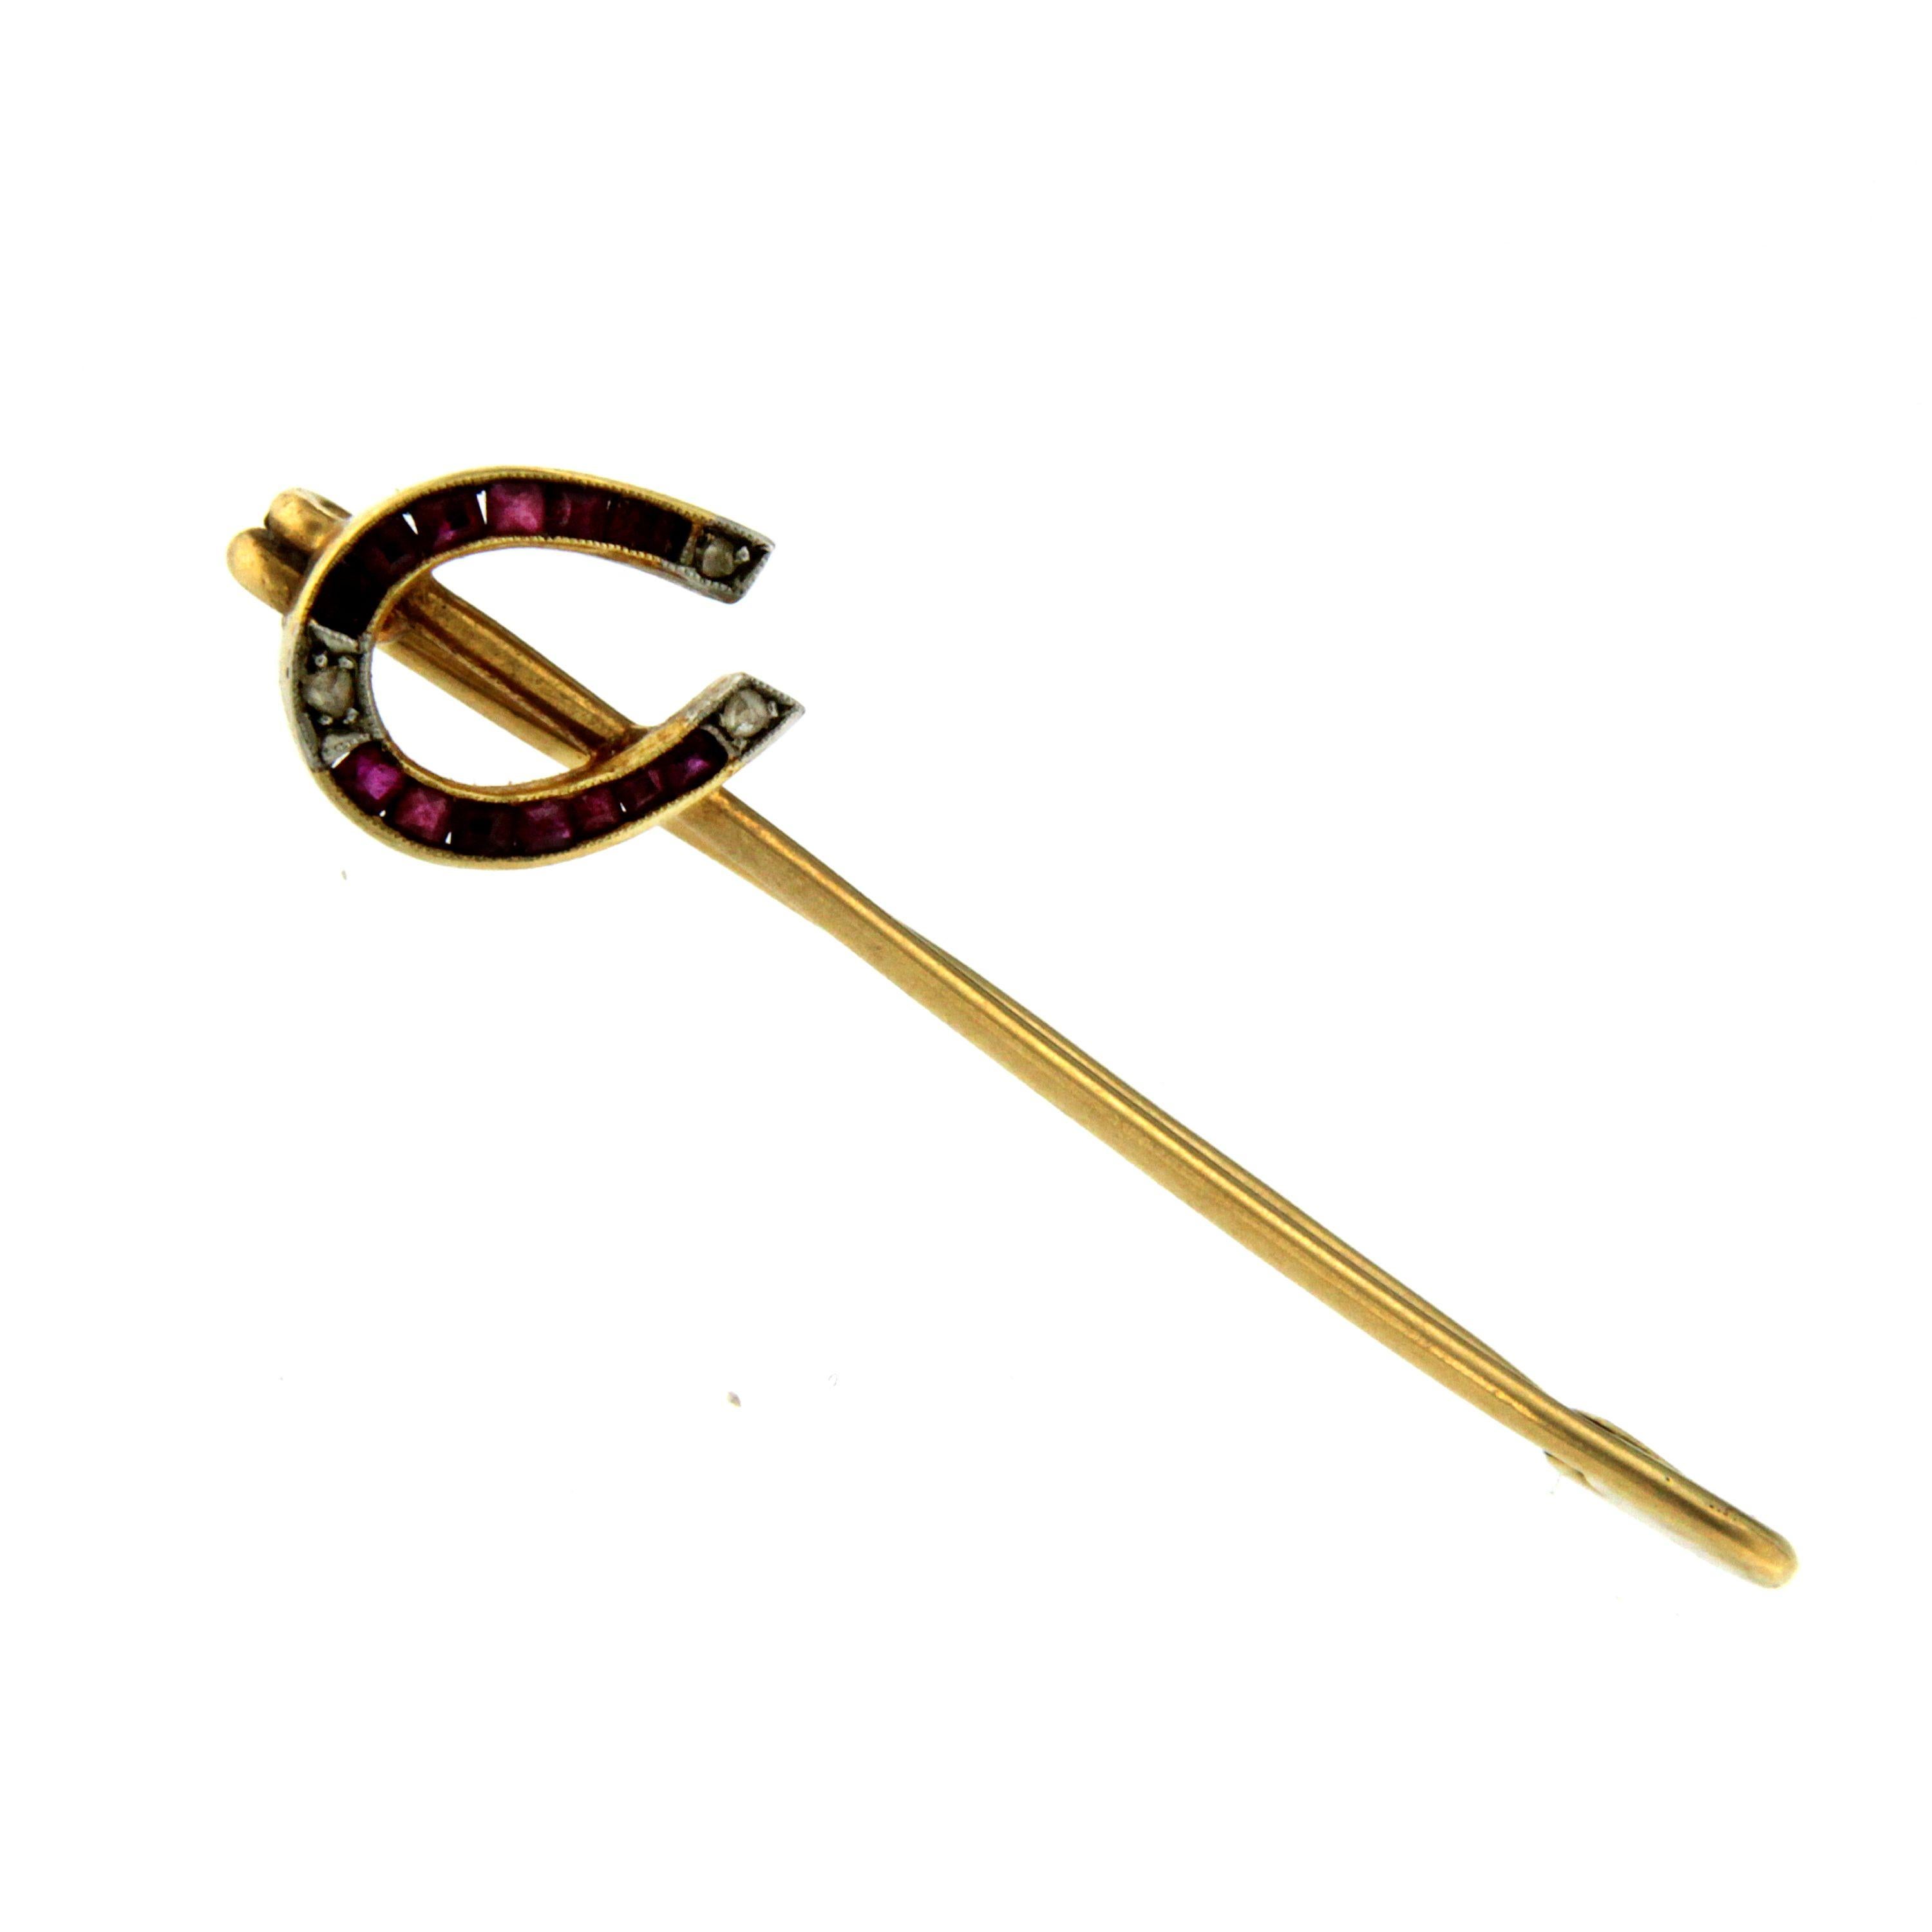 A Victorian 18k Gold Pin decorated with a Horseshoe, set with 0.20ct rubies and 0.03 ct Diamonds. Circa 1890

CONDITION: Pre-owned - Excellent 
METAL: 18k Gold
GEM STONE: Ruby 0.20 ct, Diamond 0.03 ct
DESIGN ERA: Victorian
MEASURES: long 17,71 in